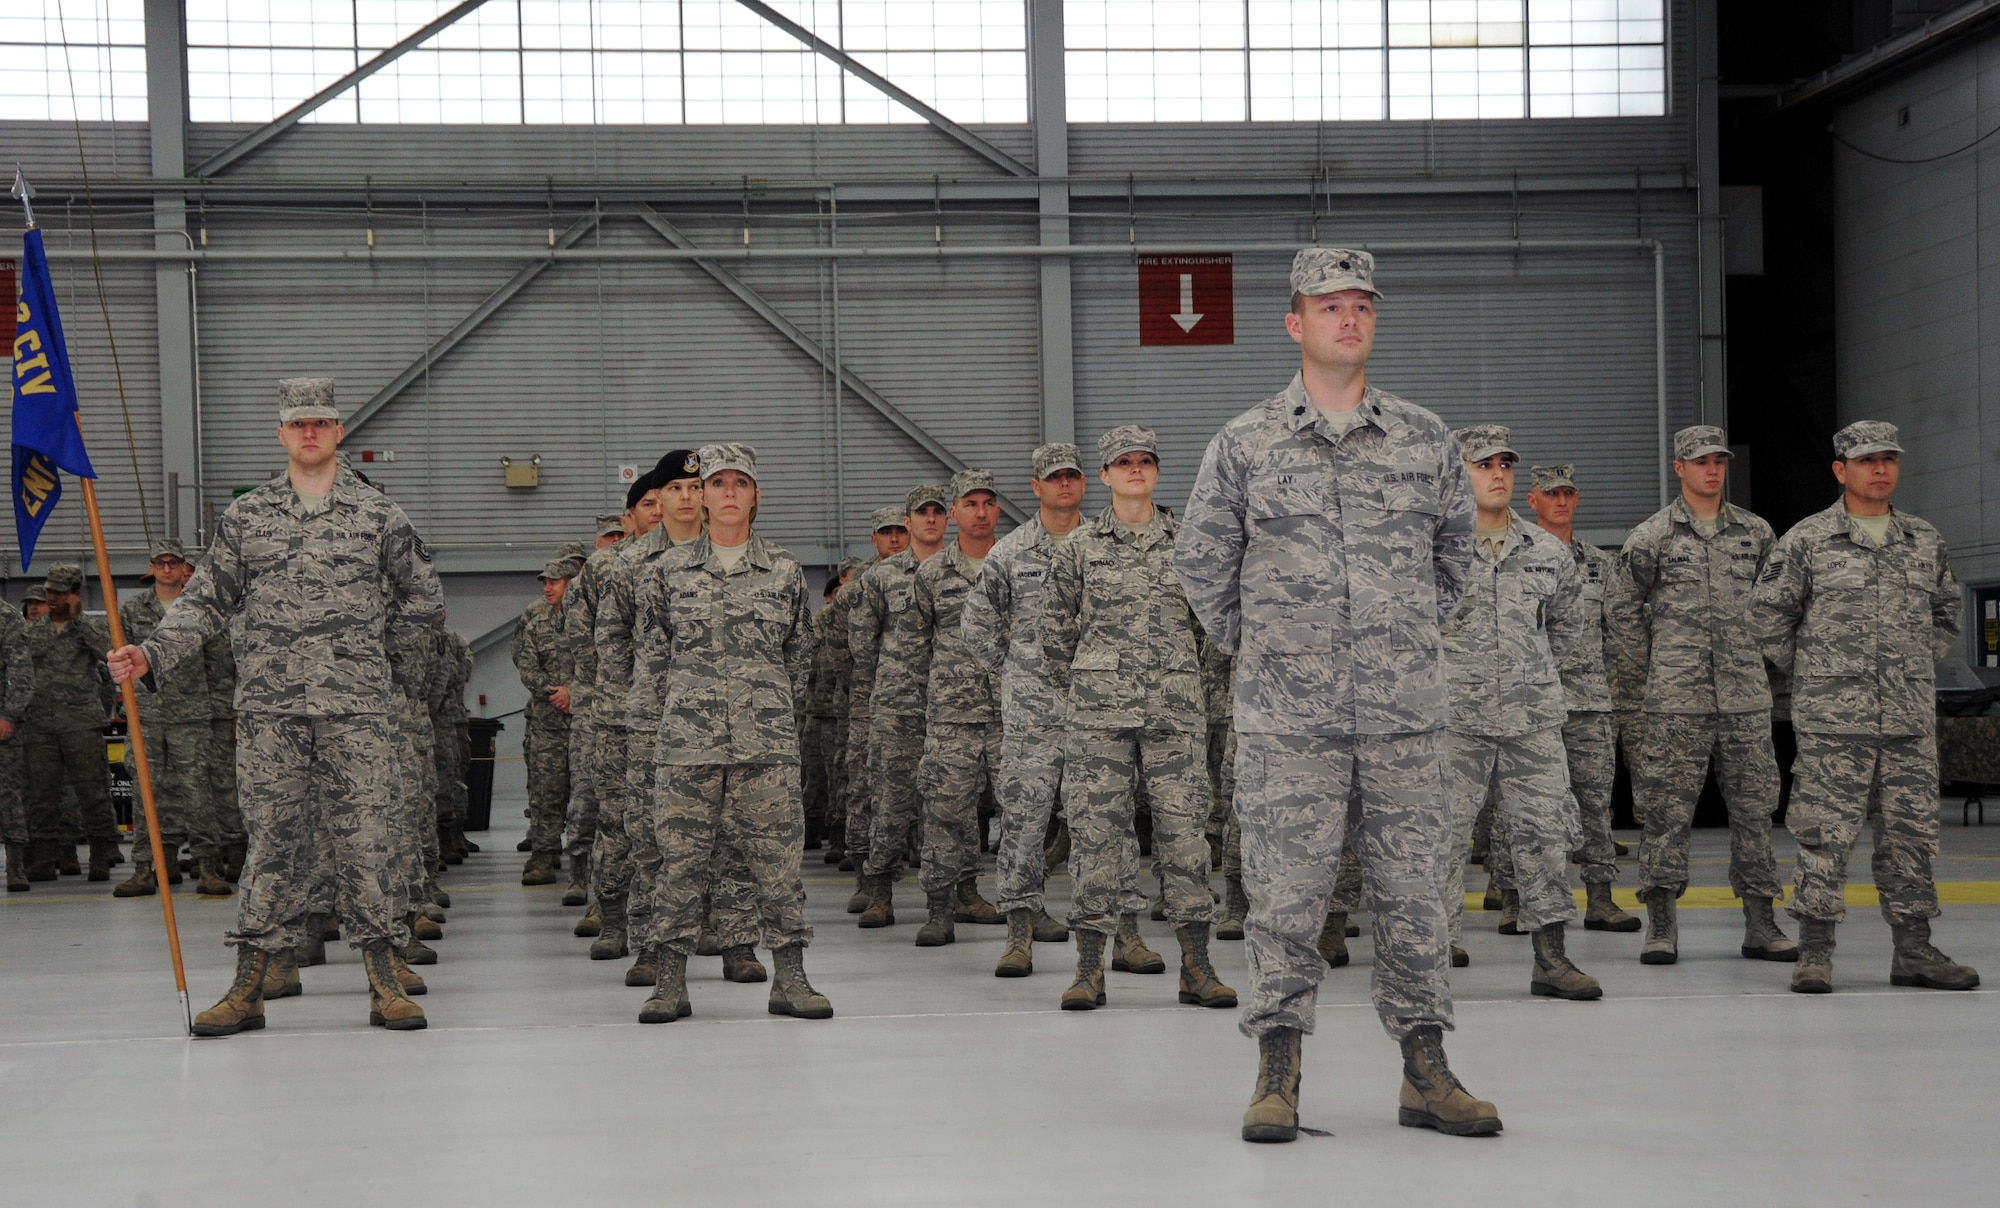 Members of the 142nd Fighter Wing Civil Engineer Squadron and Security Forces Squadron take part in their formal Demobilization Ceremony at the Portland Air National Guard Base, Ore., Dec. 7, 2014. The Airmen returned from deployments to support Operation Enduring Freedom. (U.S. Air National Guard photo by Tech. Sgt. John Hughel, 142nd Fighter Wing Public Affairs/Released)